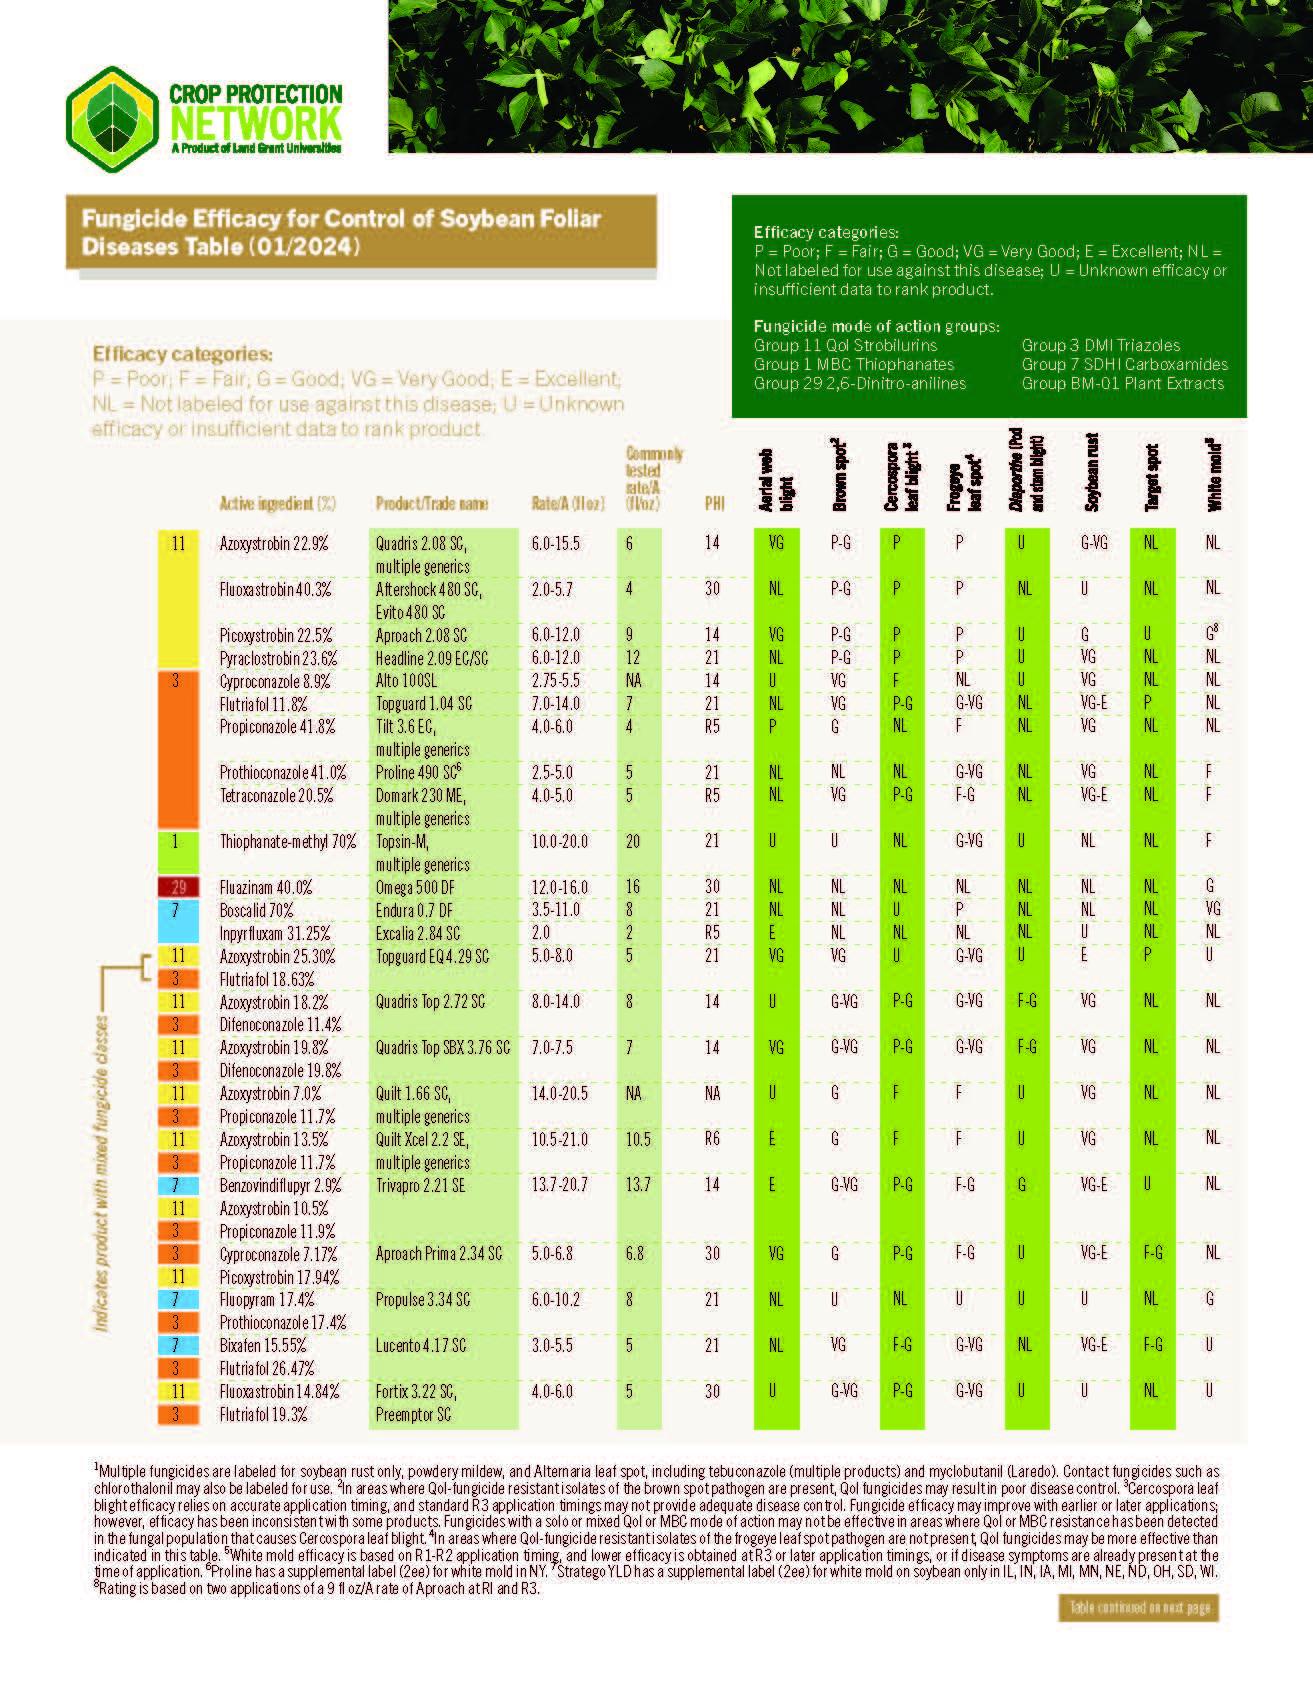 Fungicide Efficacy for Control of Soybean Follar Diseases Table-page 2